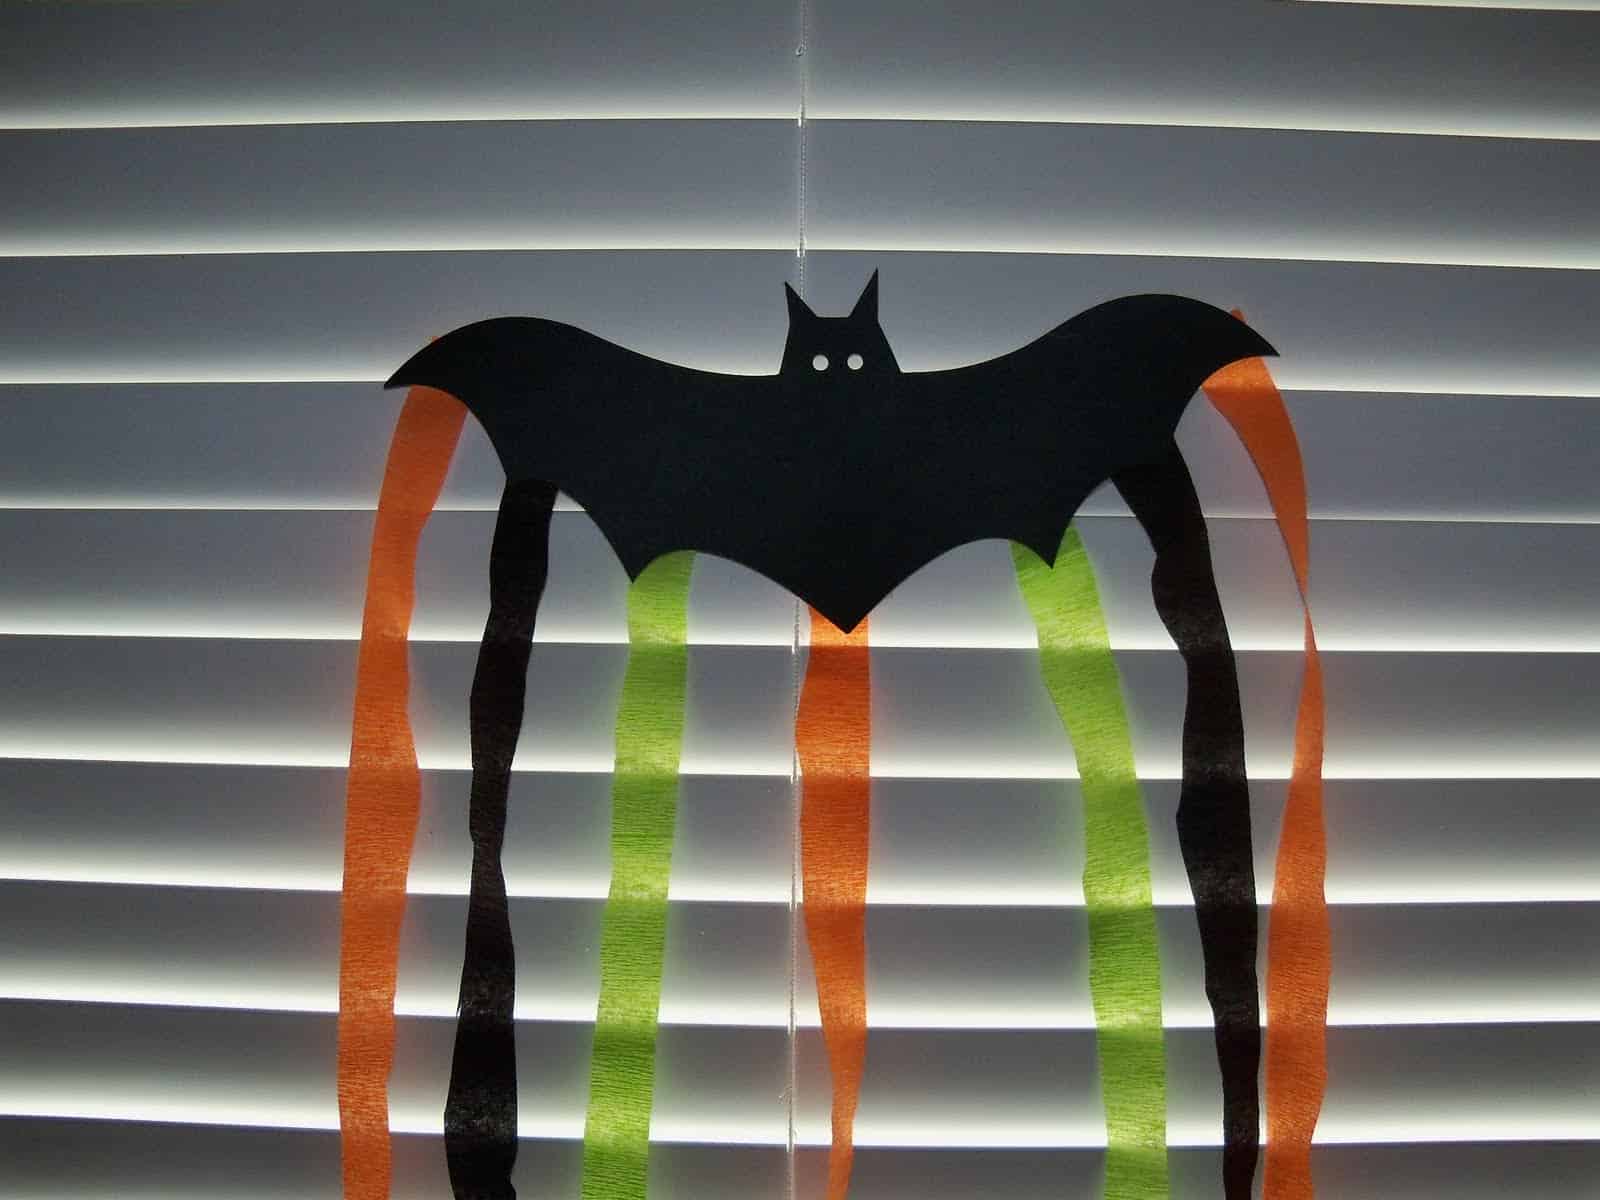 Construction paper and streamer bats